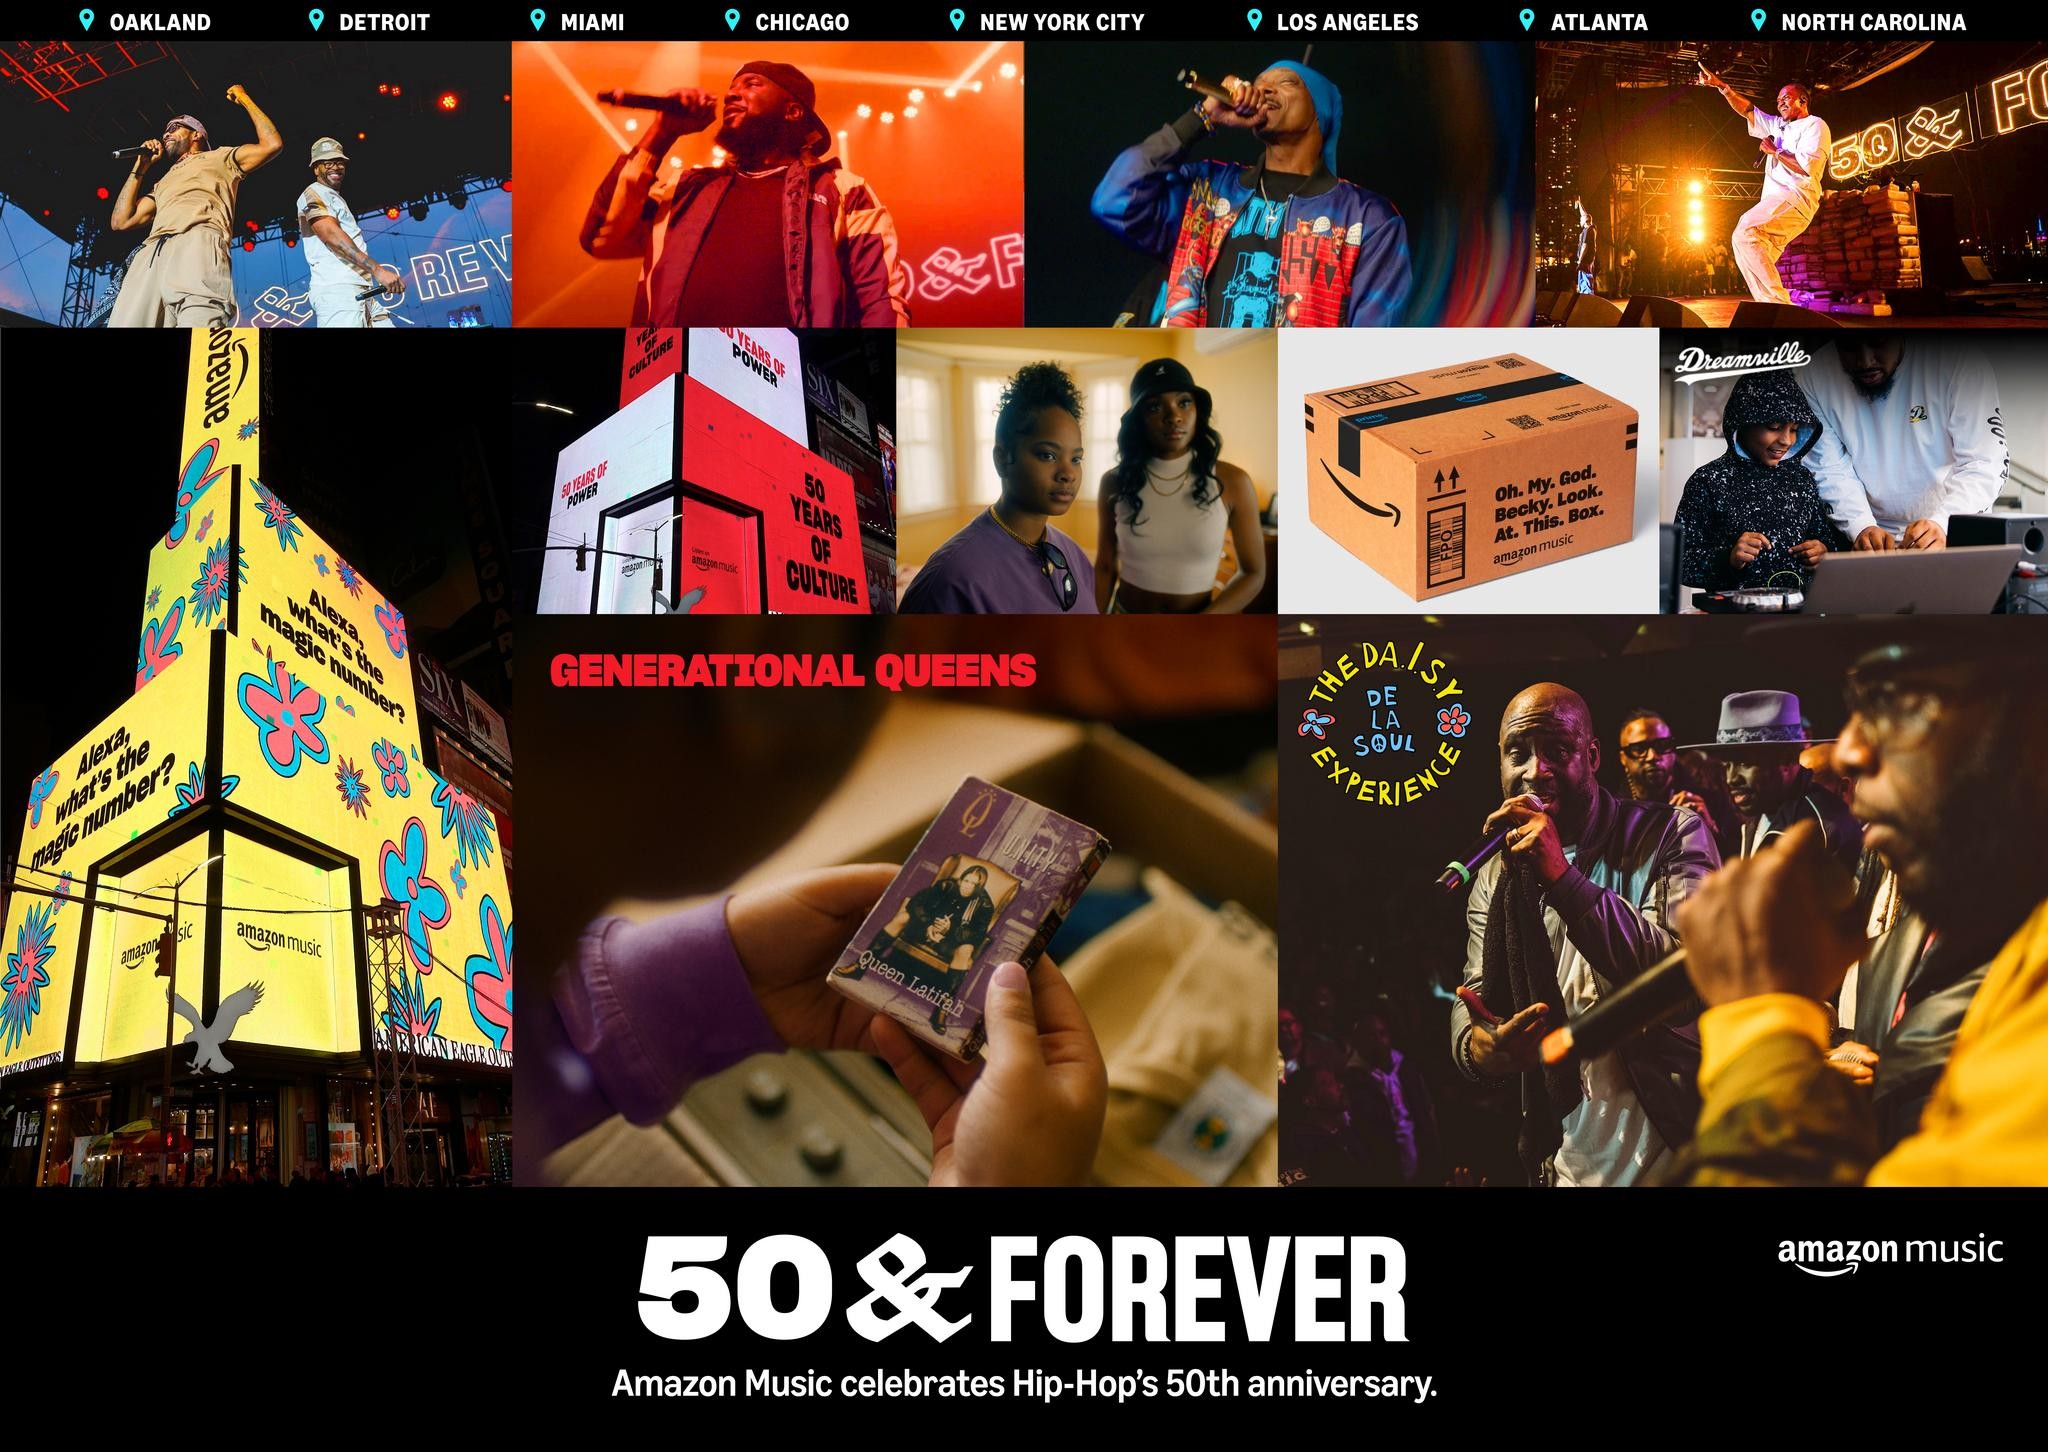 50 & Forever - a celebration of 50 years of hip hop